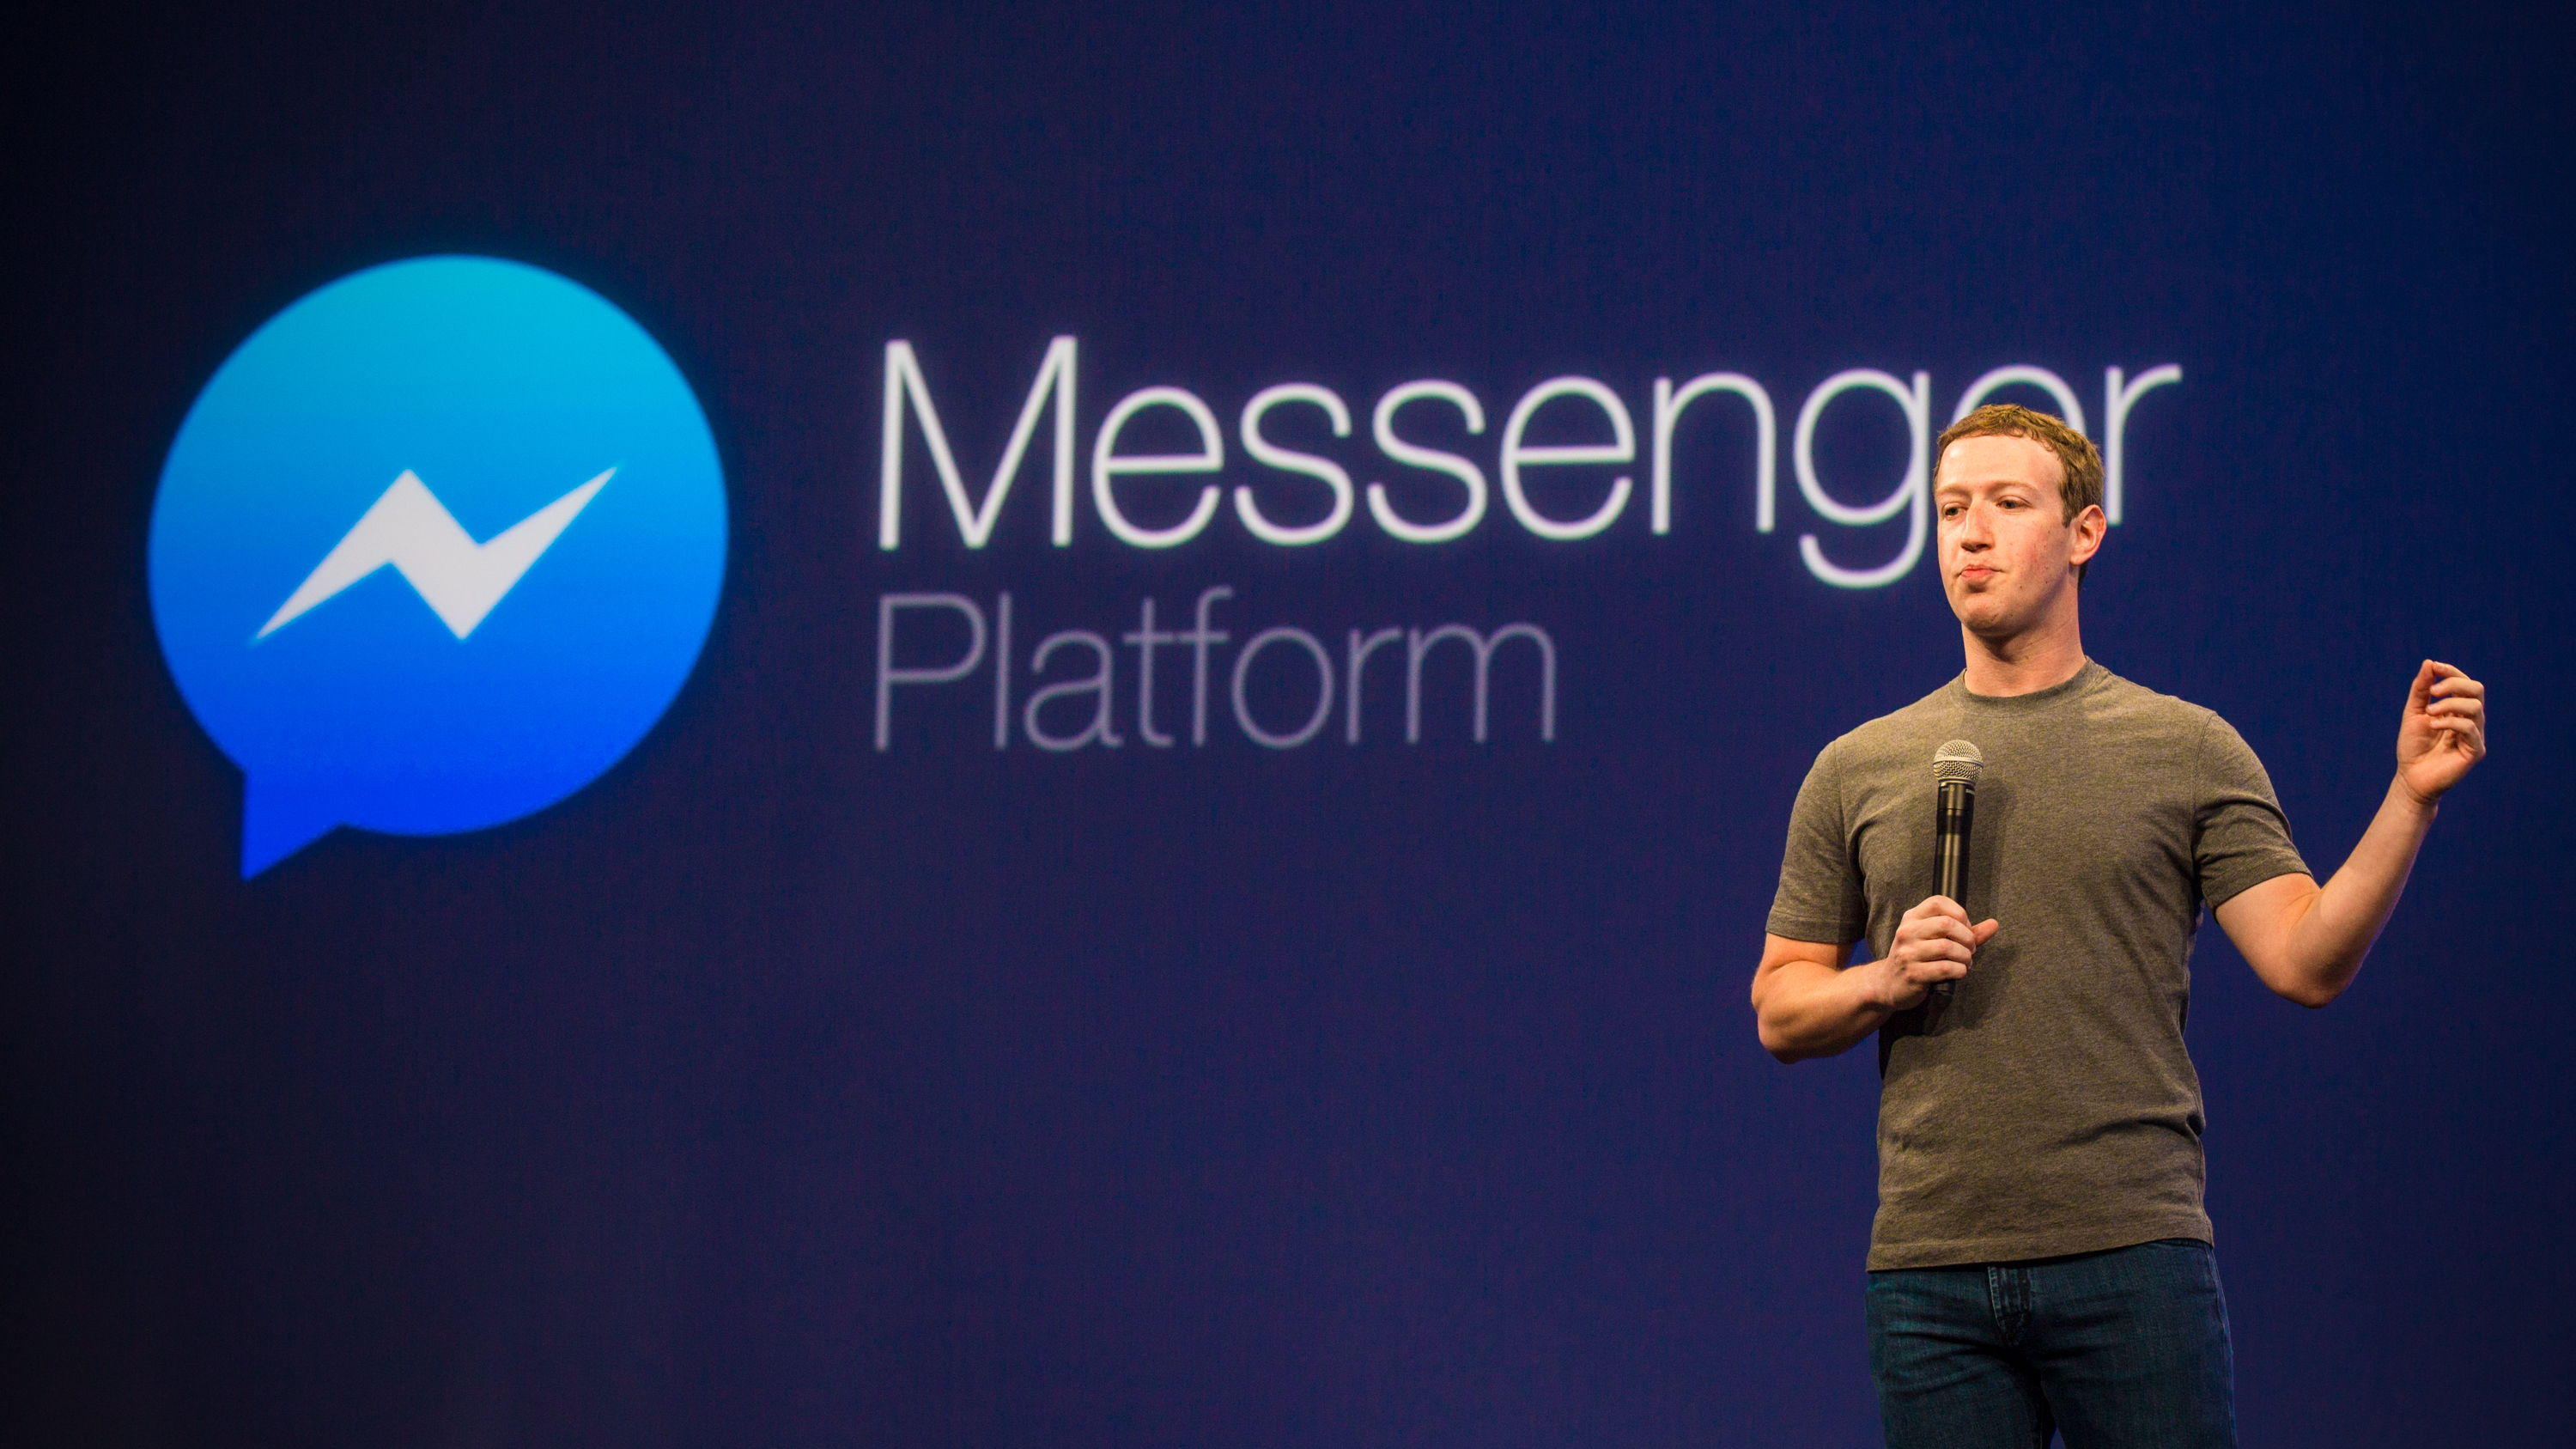 Facebook CEO Mark Zuckerberg touts the Messenger app, now rolling out to anyone with a phone number.